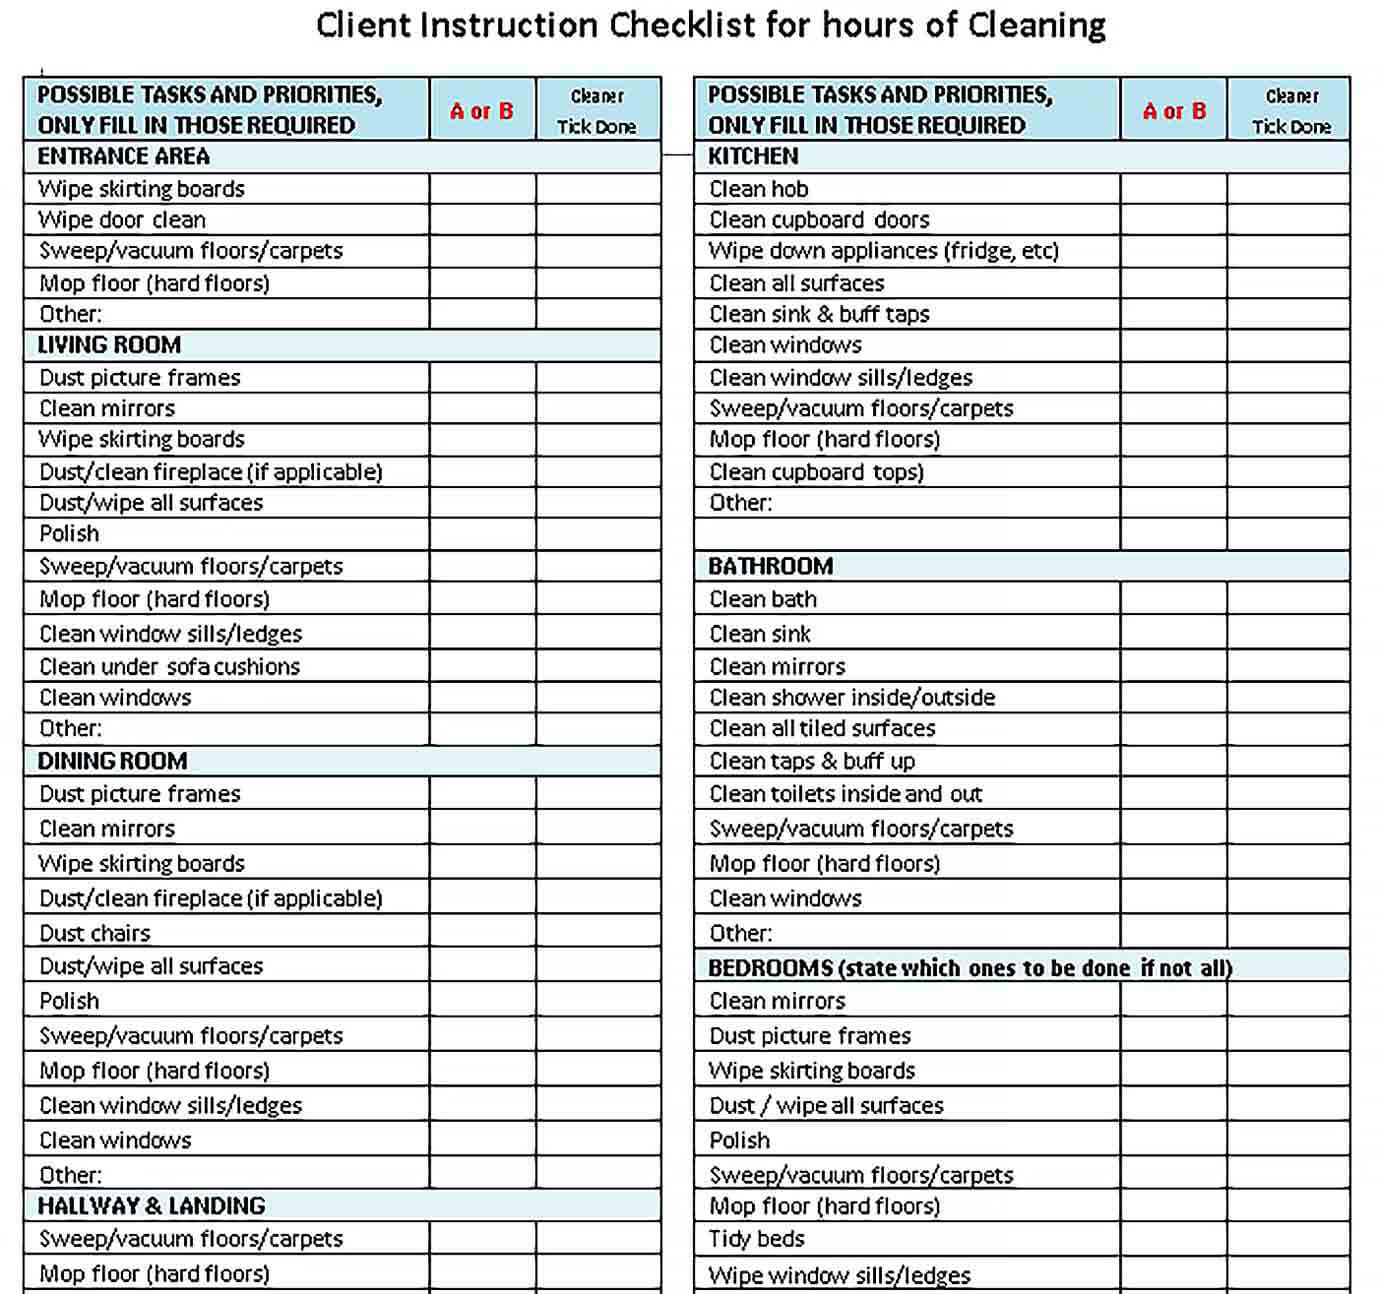 Sample House Cleaning Client Instruction Checklist